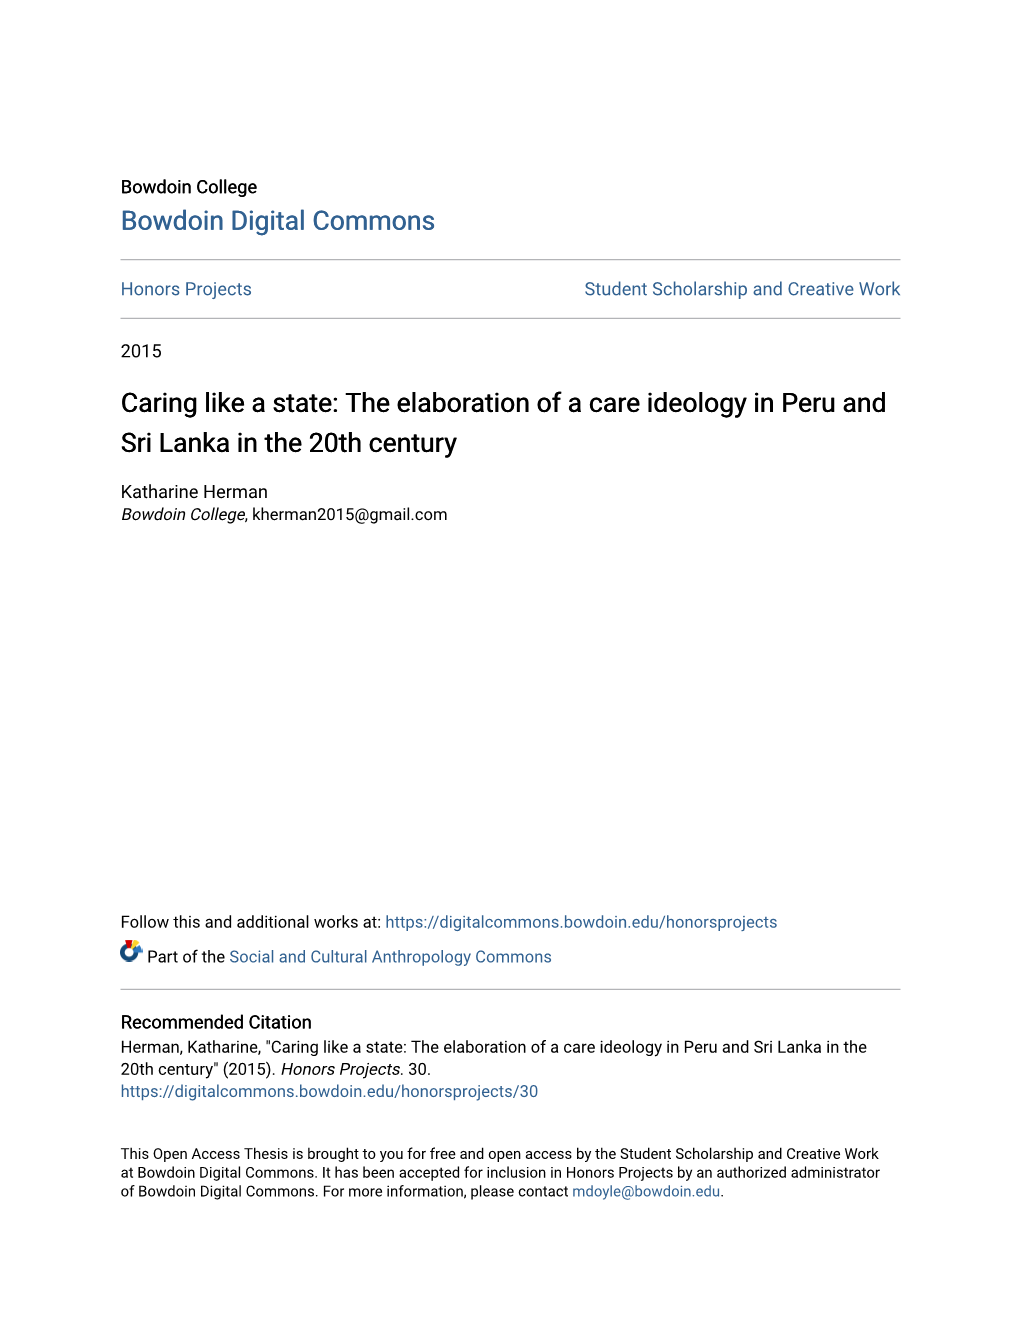 Caring Like a State: the Elaboration of a Care Ideology in Peru and Sri Lanka in the 20Th Century